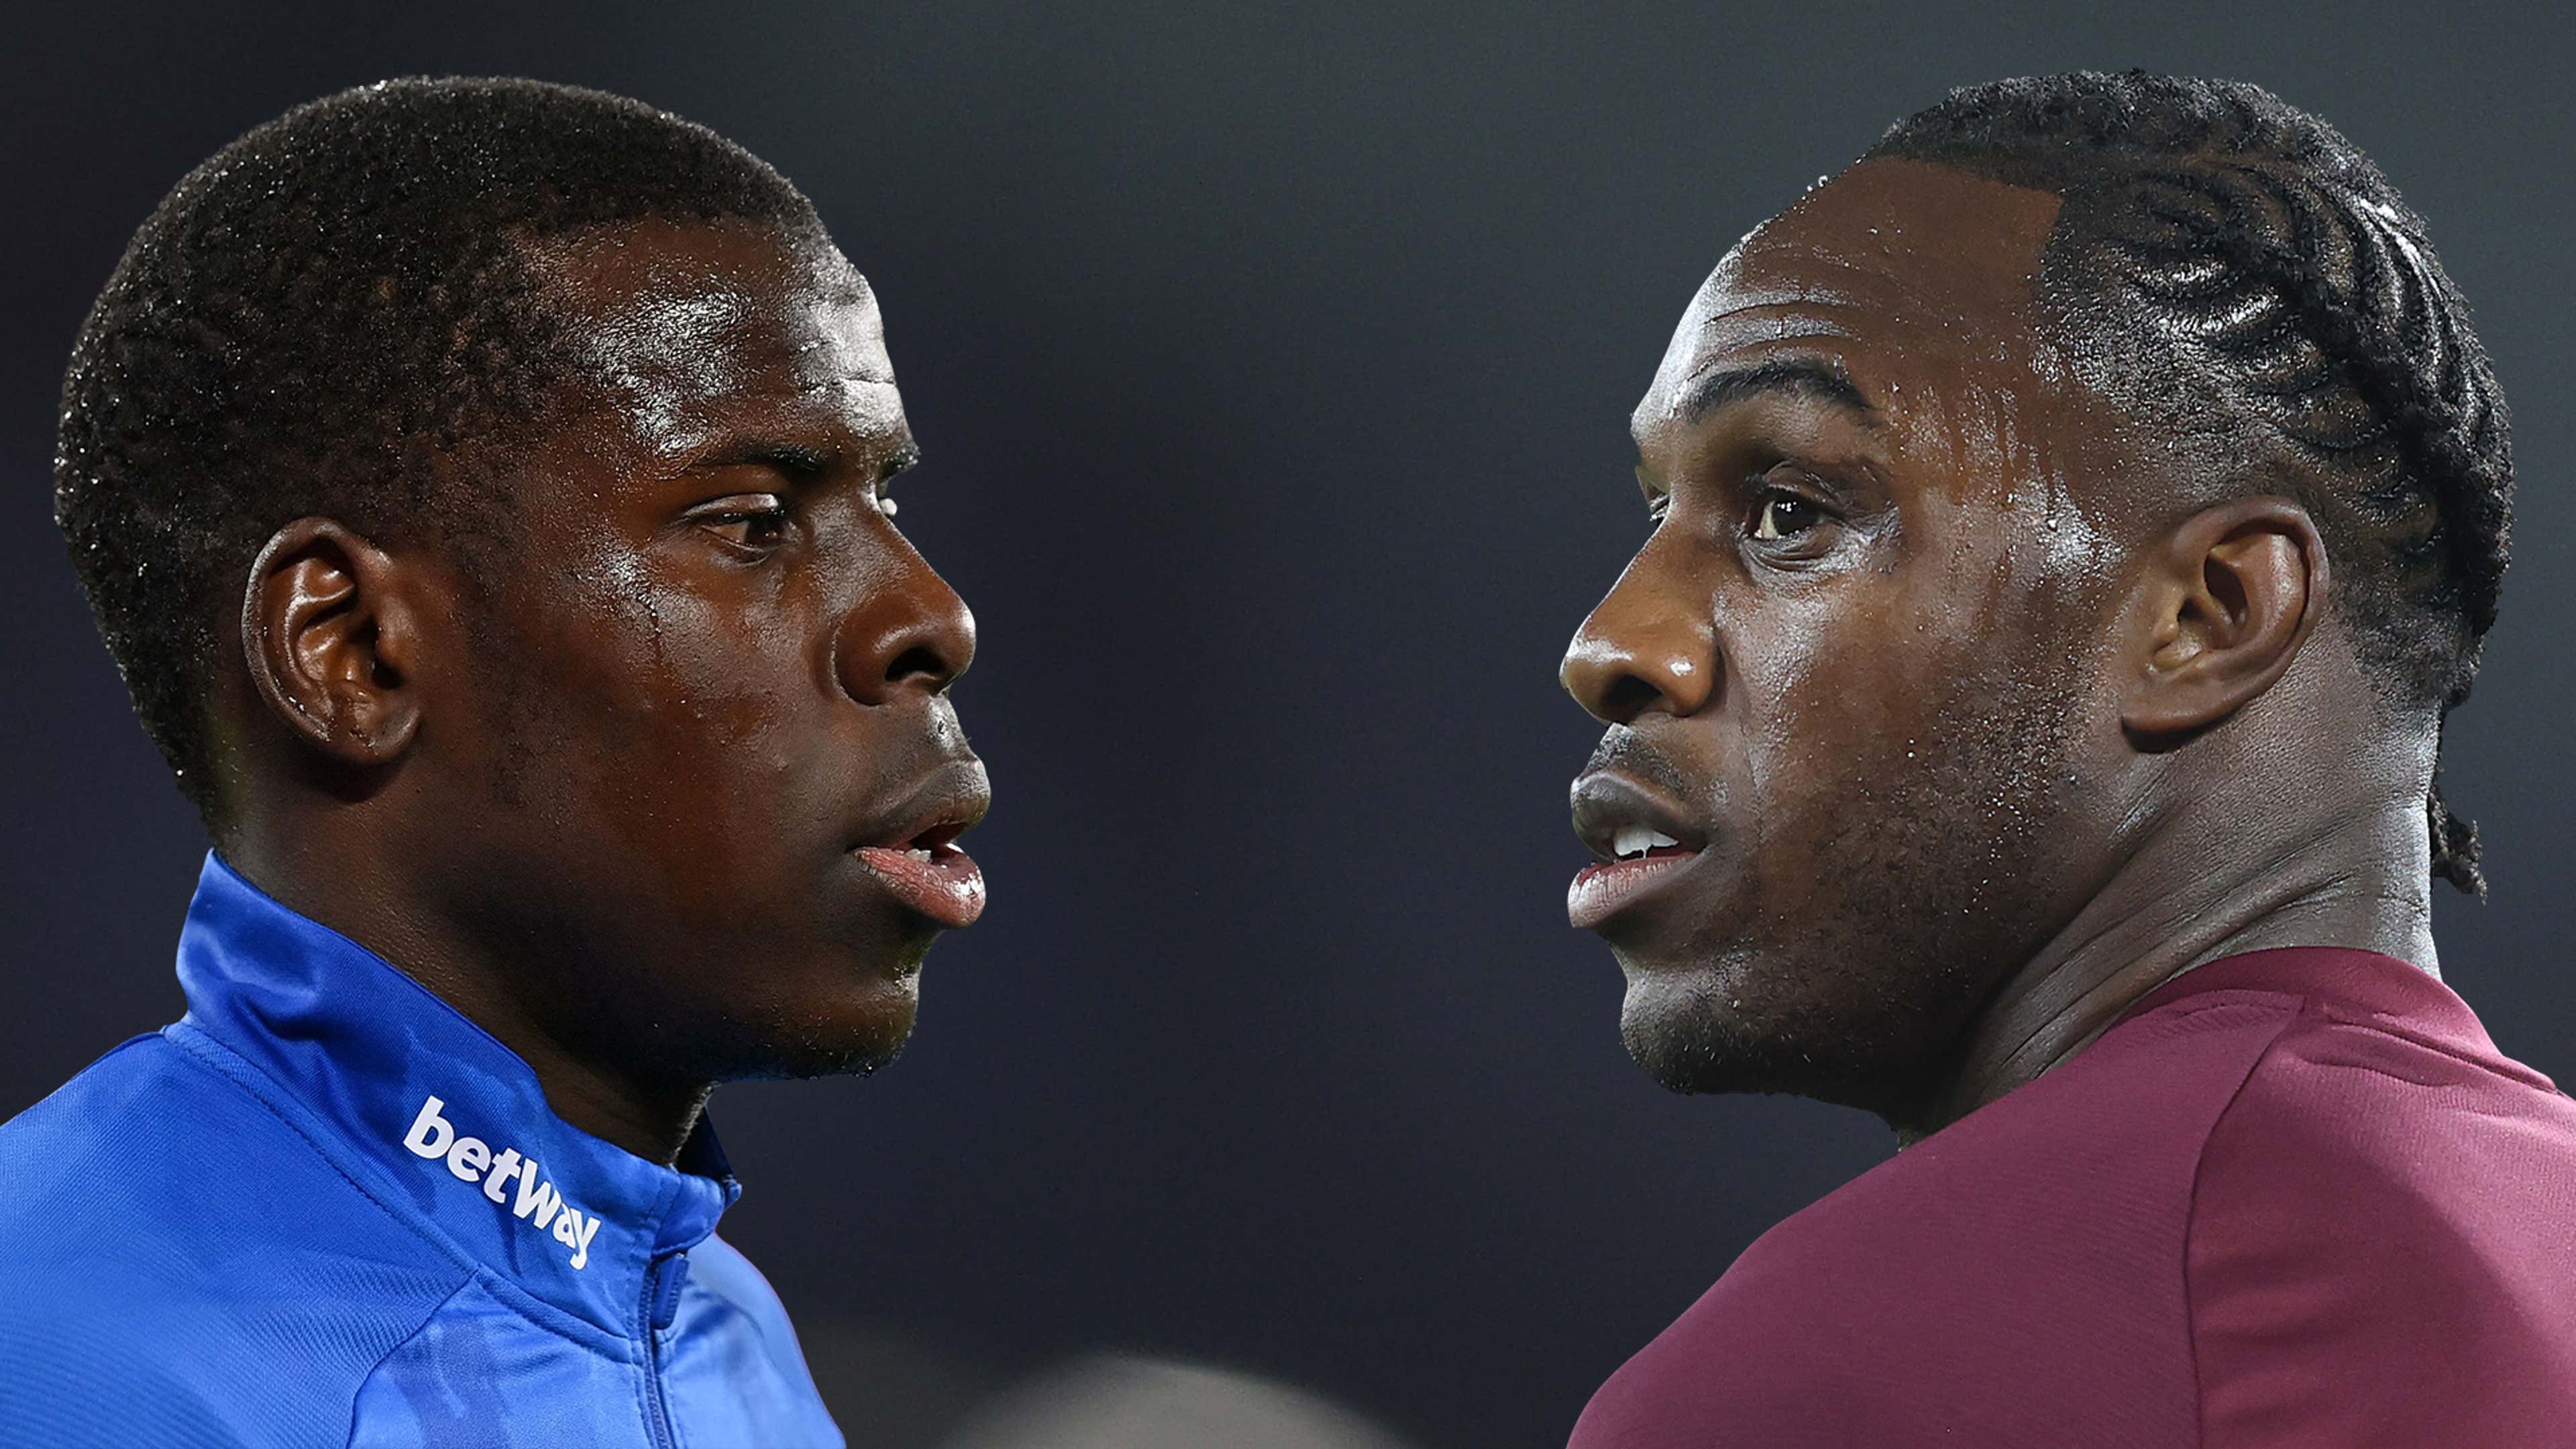 Is it worse than racism?': Antonio questions reaction over Zouma